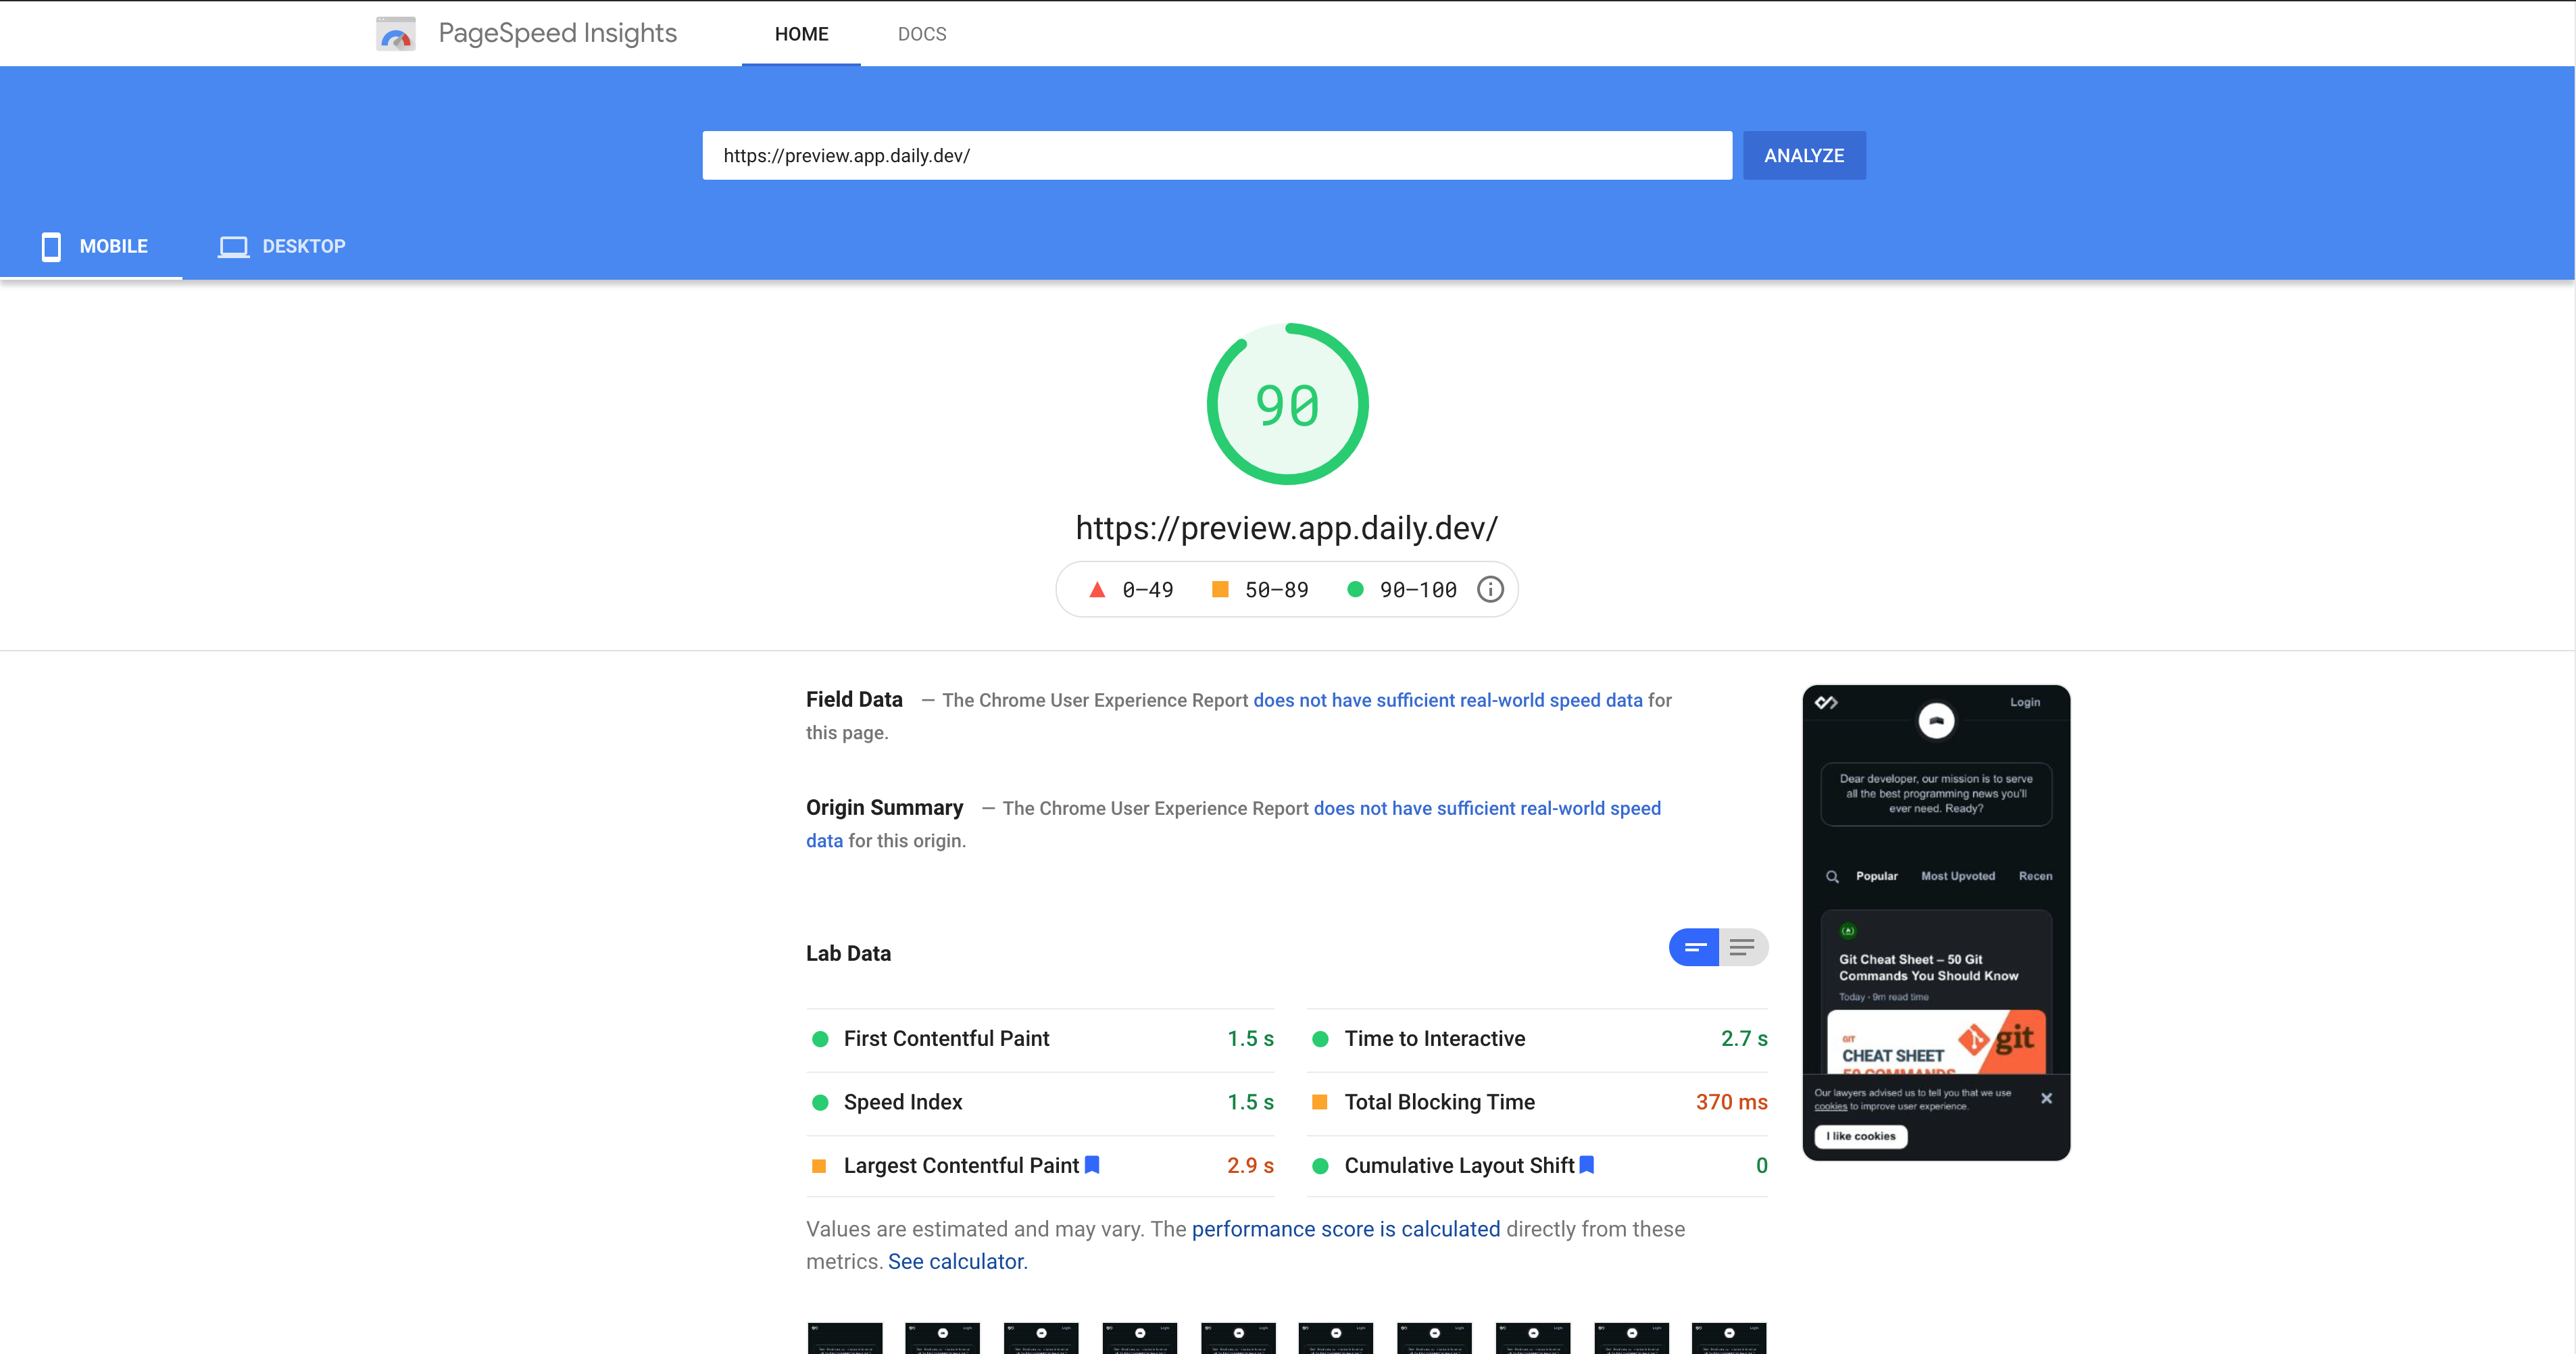 PageSpeed report - score 90 out 100